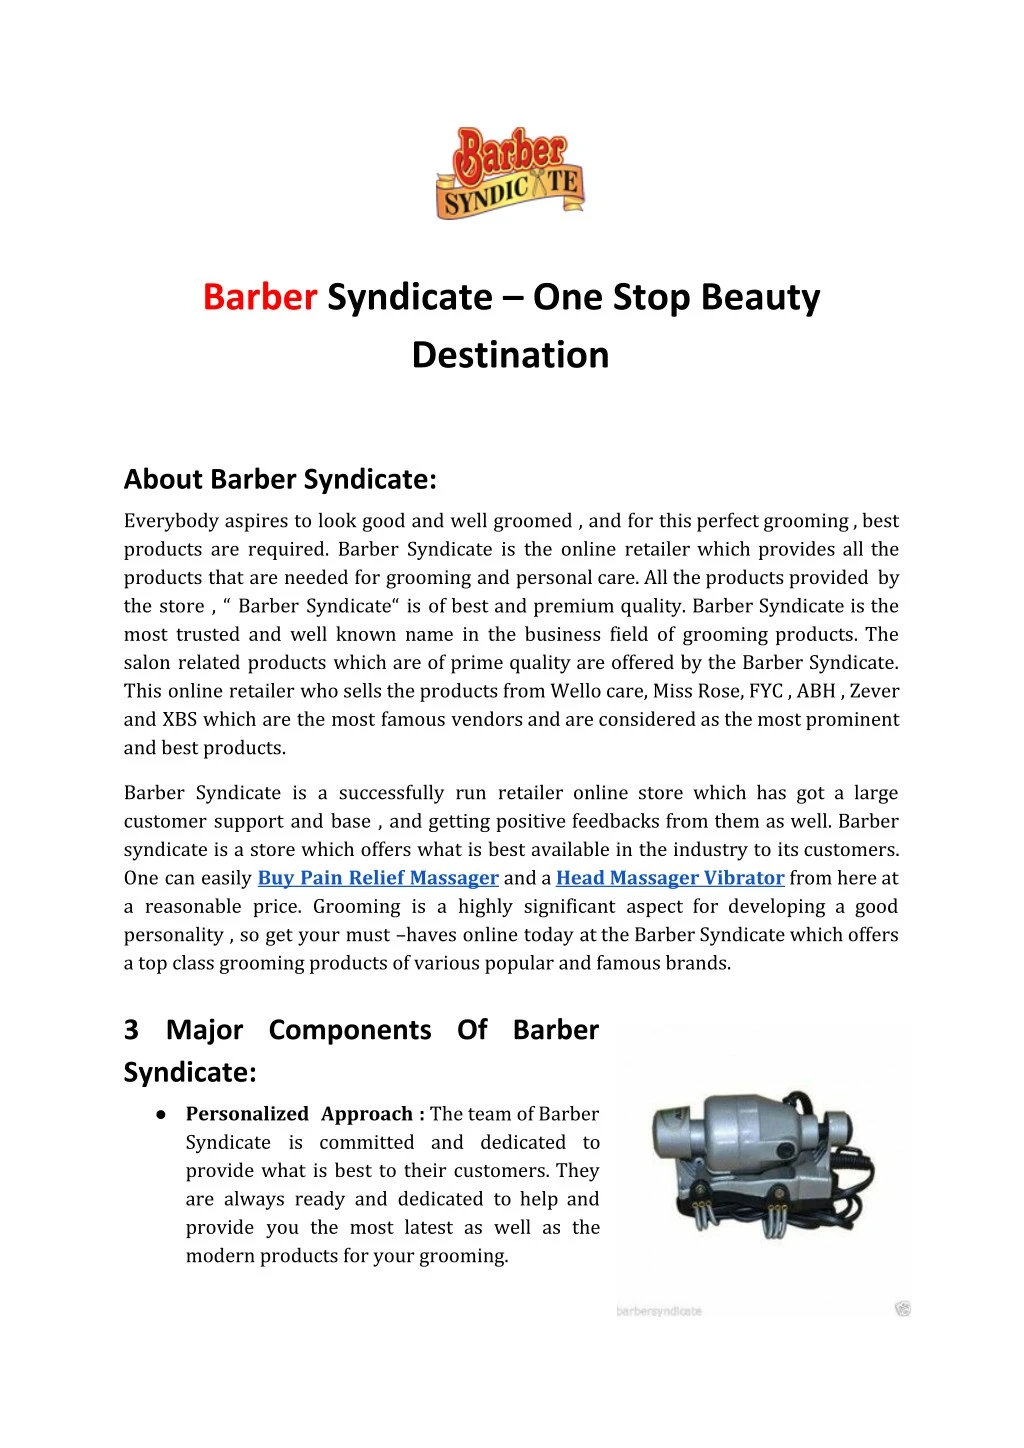 barber syndicate one stop beauty destination